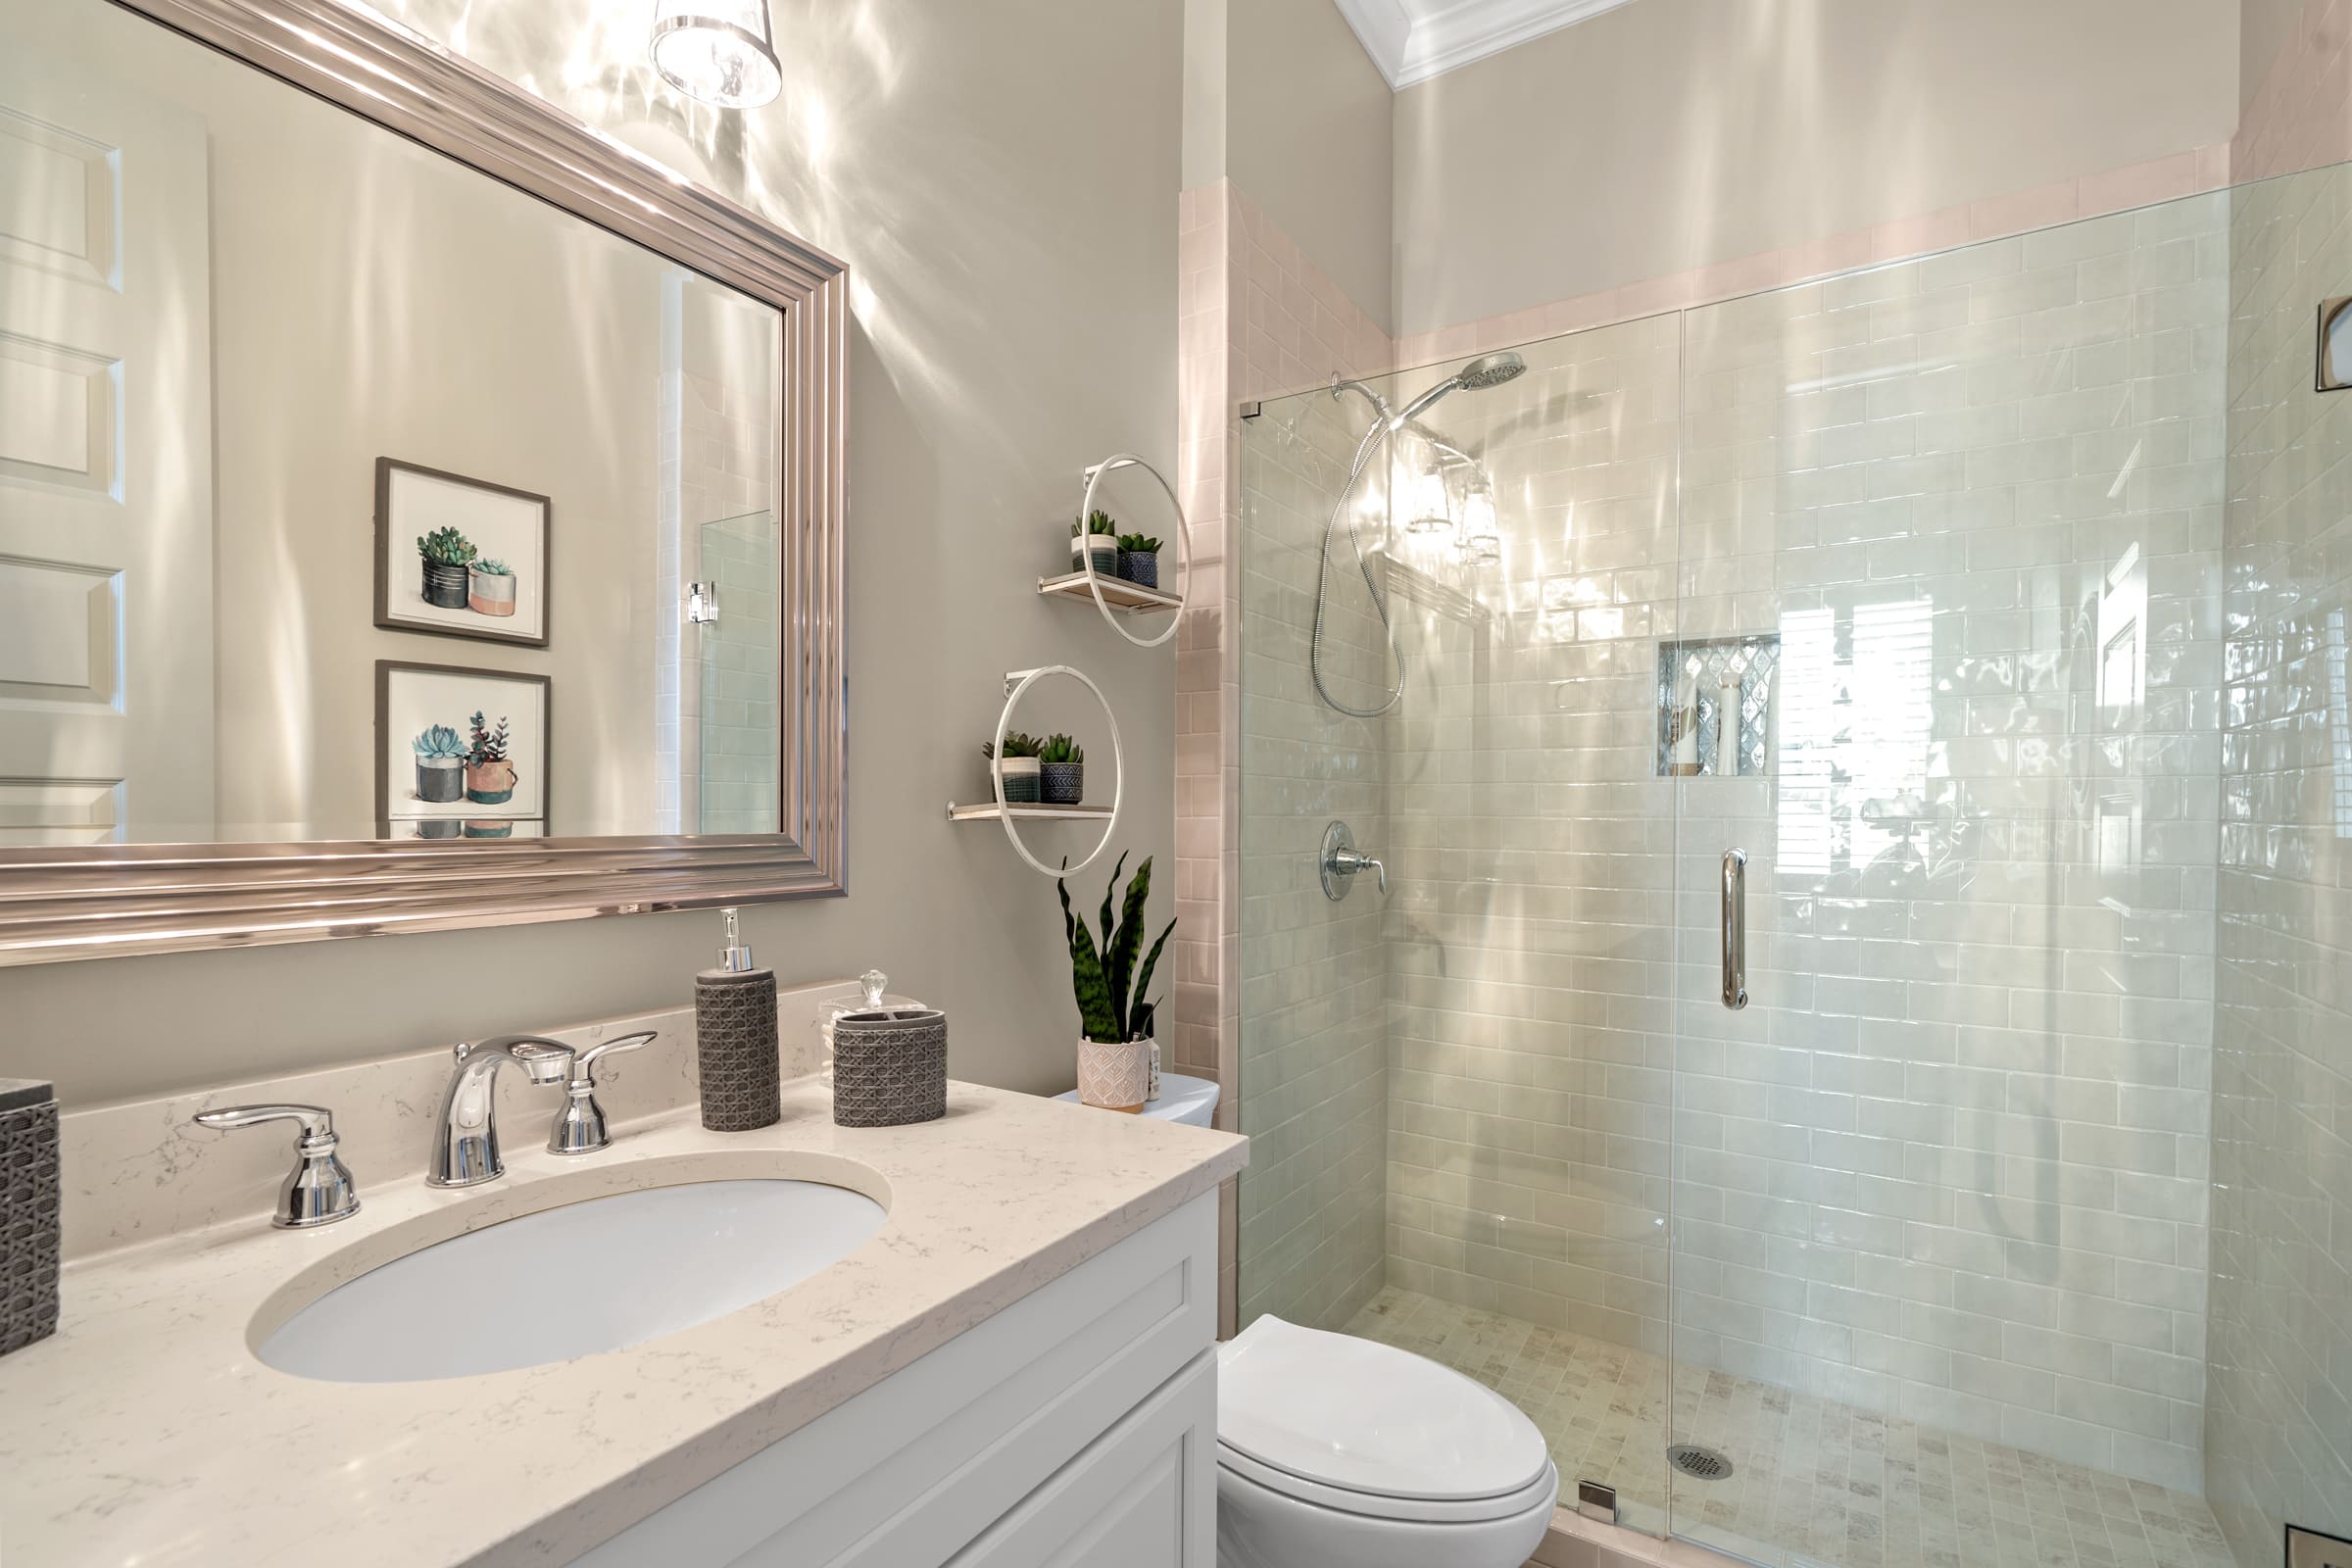 Beautiful Bathroom with Marble Bathroom CounterTop and Walk-in Shower |PAXISgroup